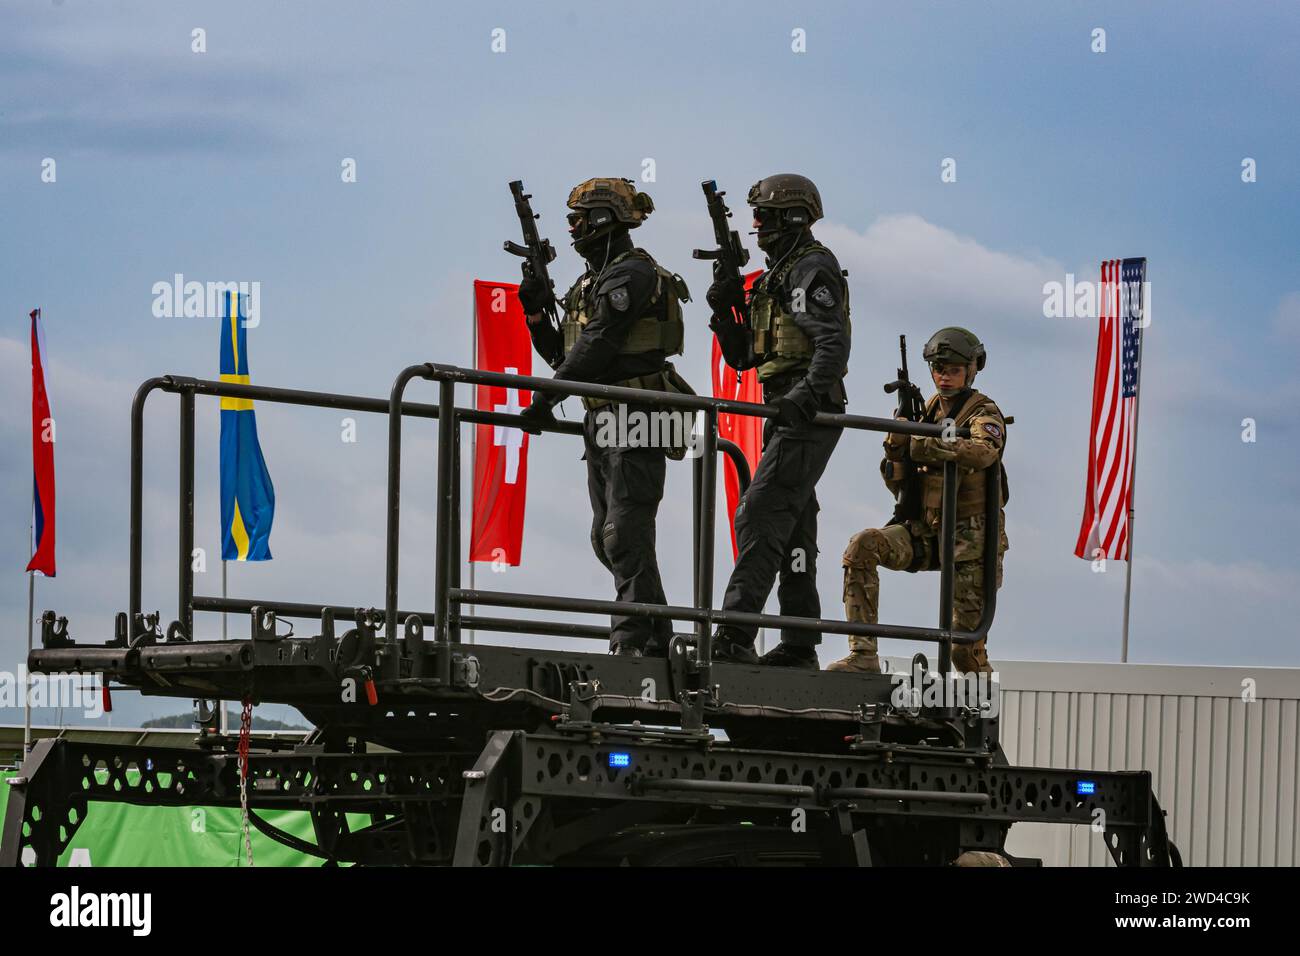 Swat special forces police and tactical units in uniform rescue hostages in a training scenario at NATO days airshow 2022. Soldiers with guns defend. Stock Photo